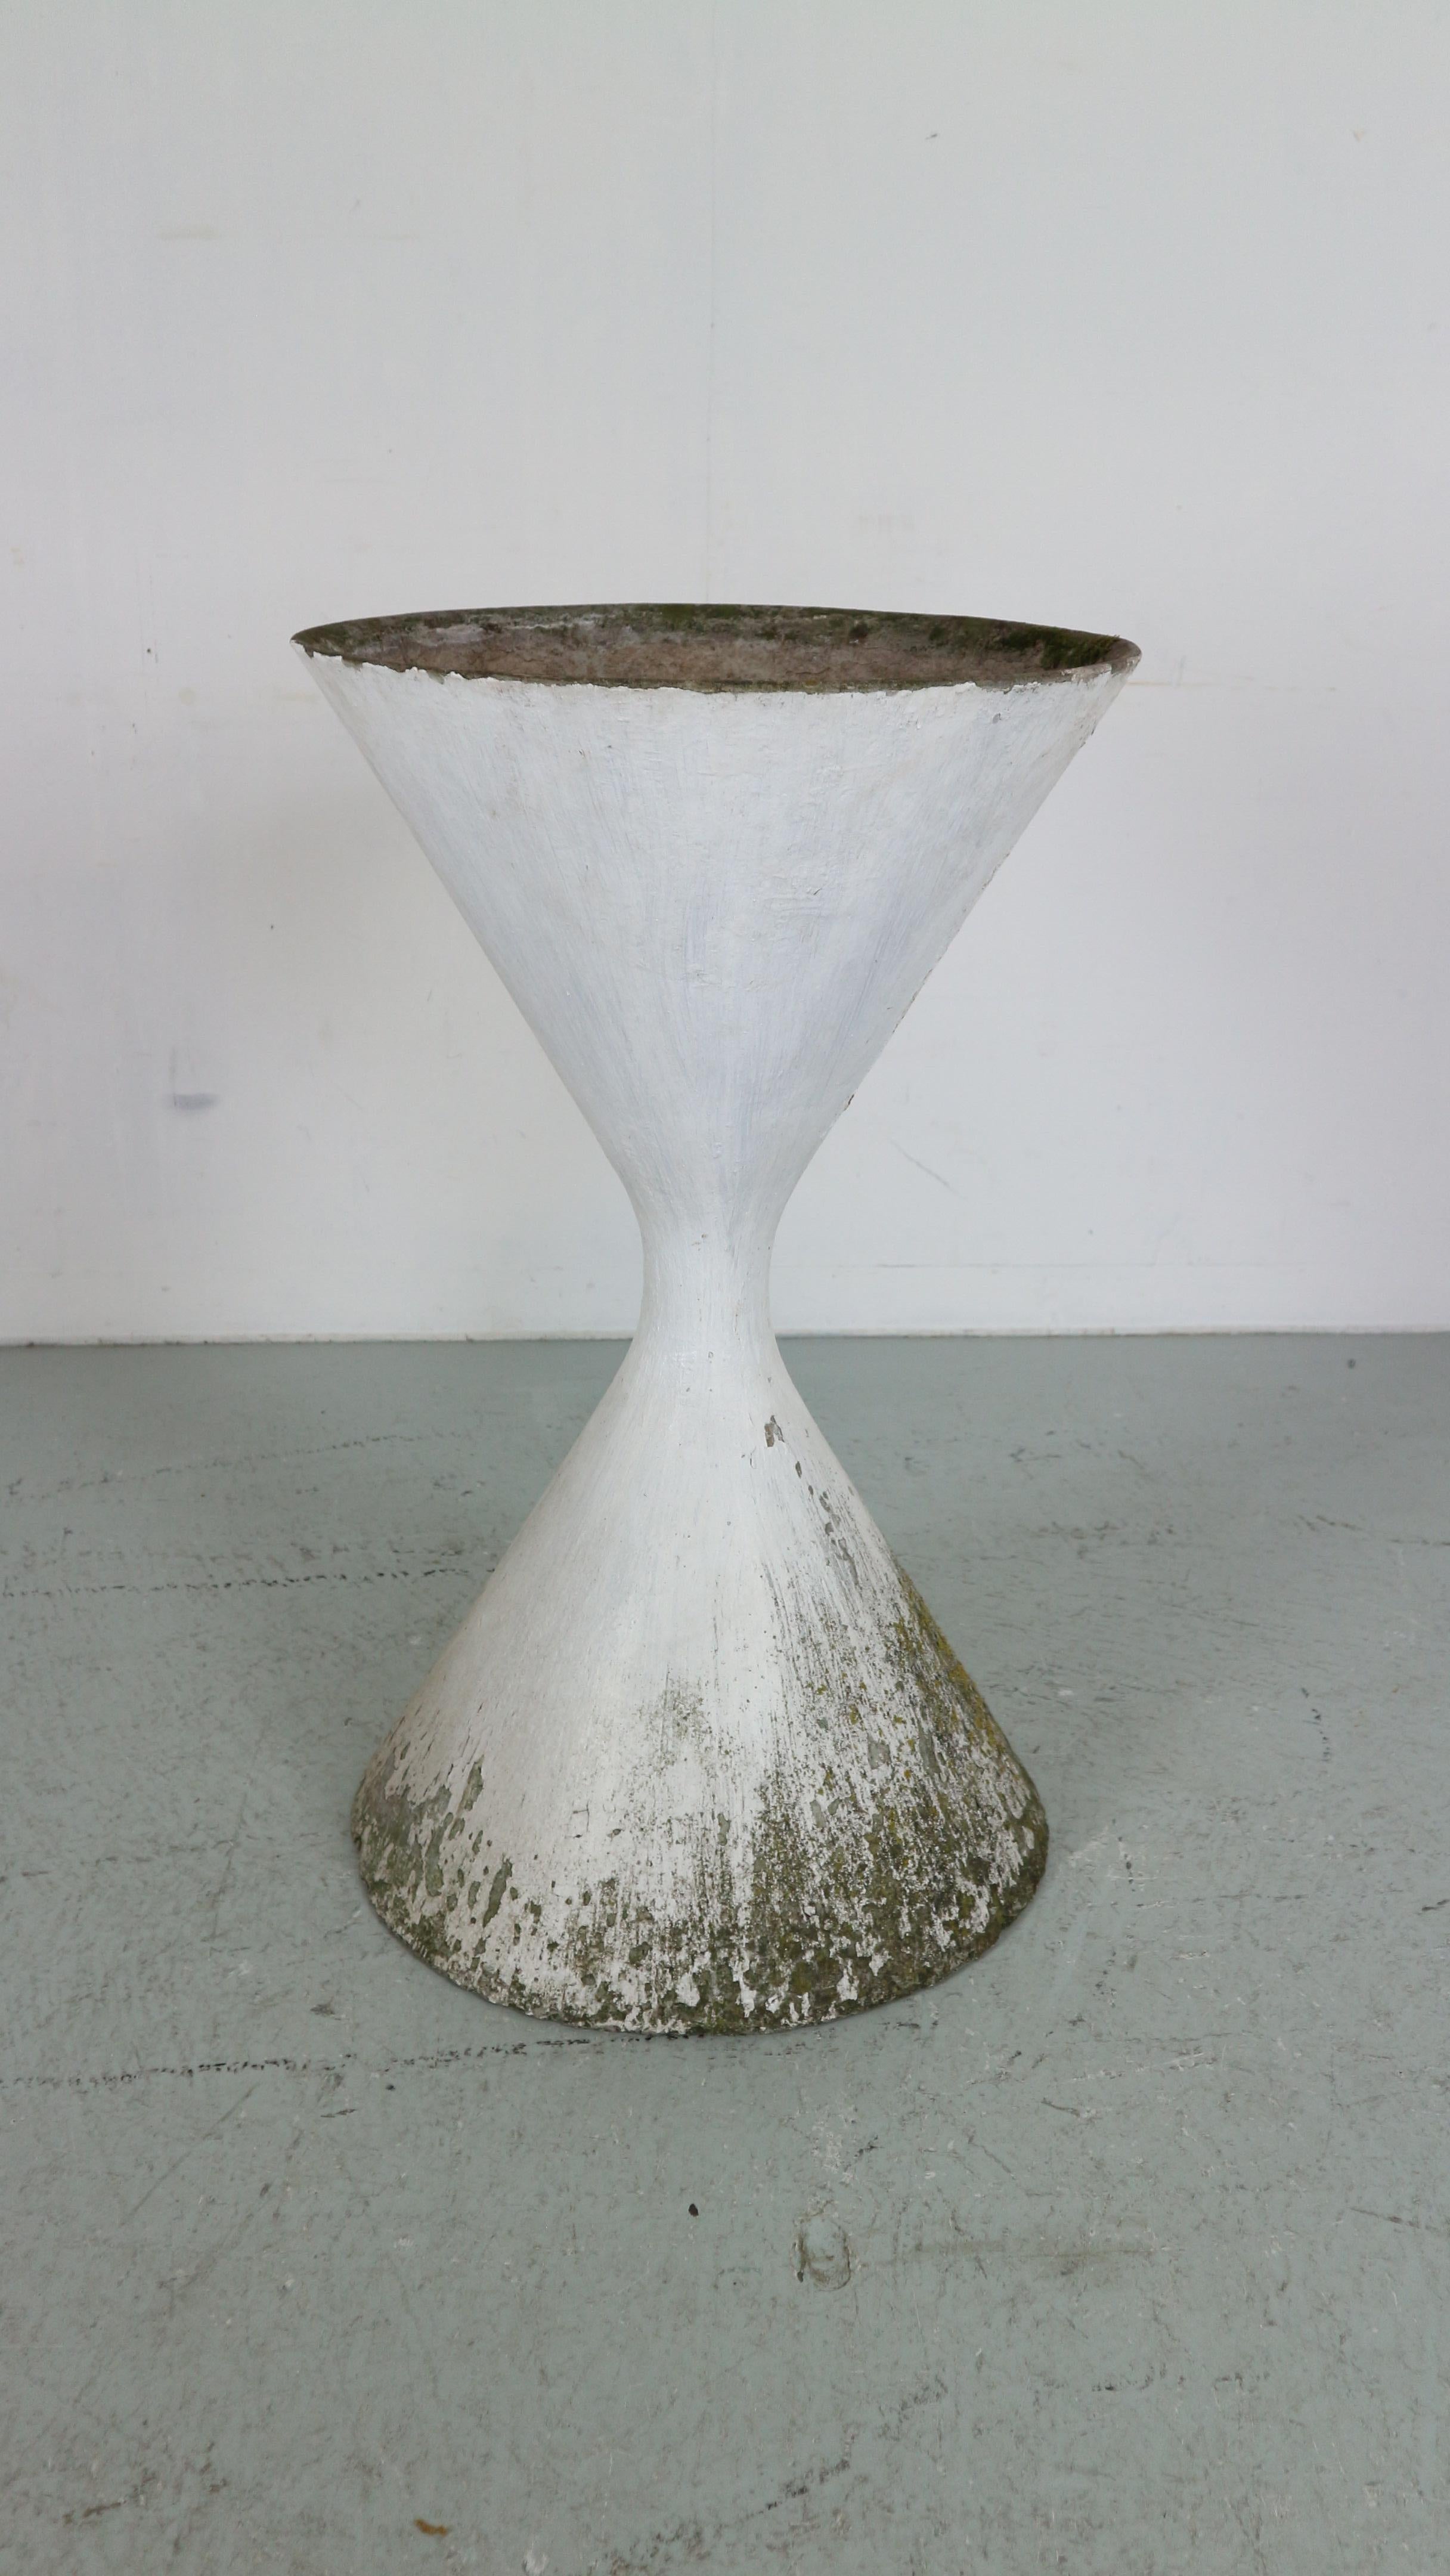 High shaped diabolo shaped planter designed by Willy Guhl and Anton Bee and manufactured by Eternit Ag, Switzerland 1954.
 This planter is made of cellulose infused fibber cement.
Very nice shaped planters in good condition
. Would look highly